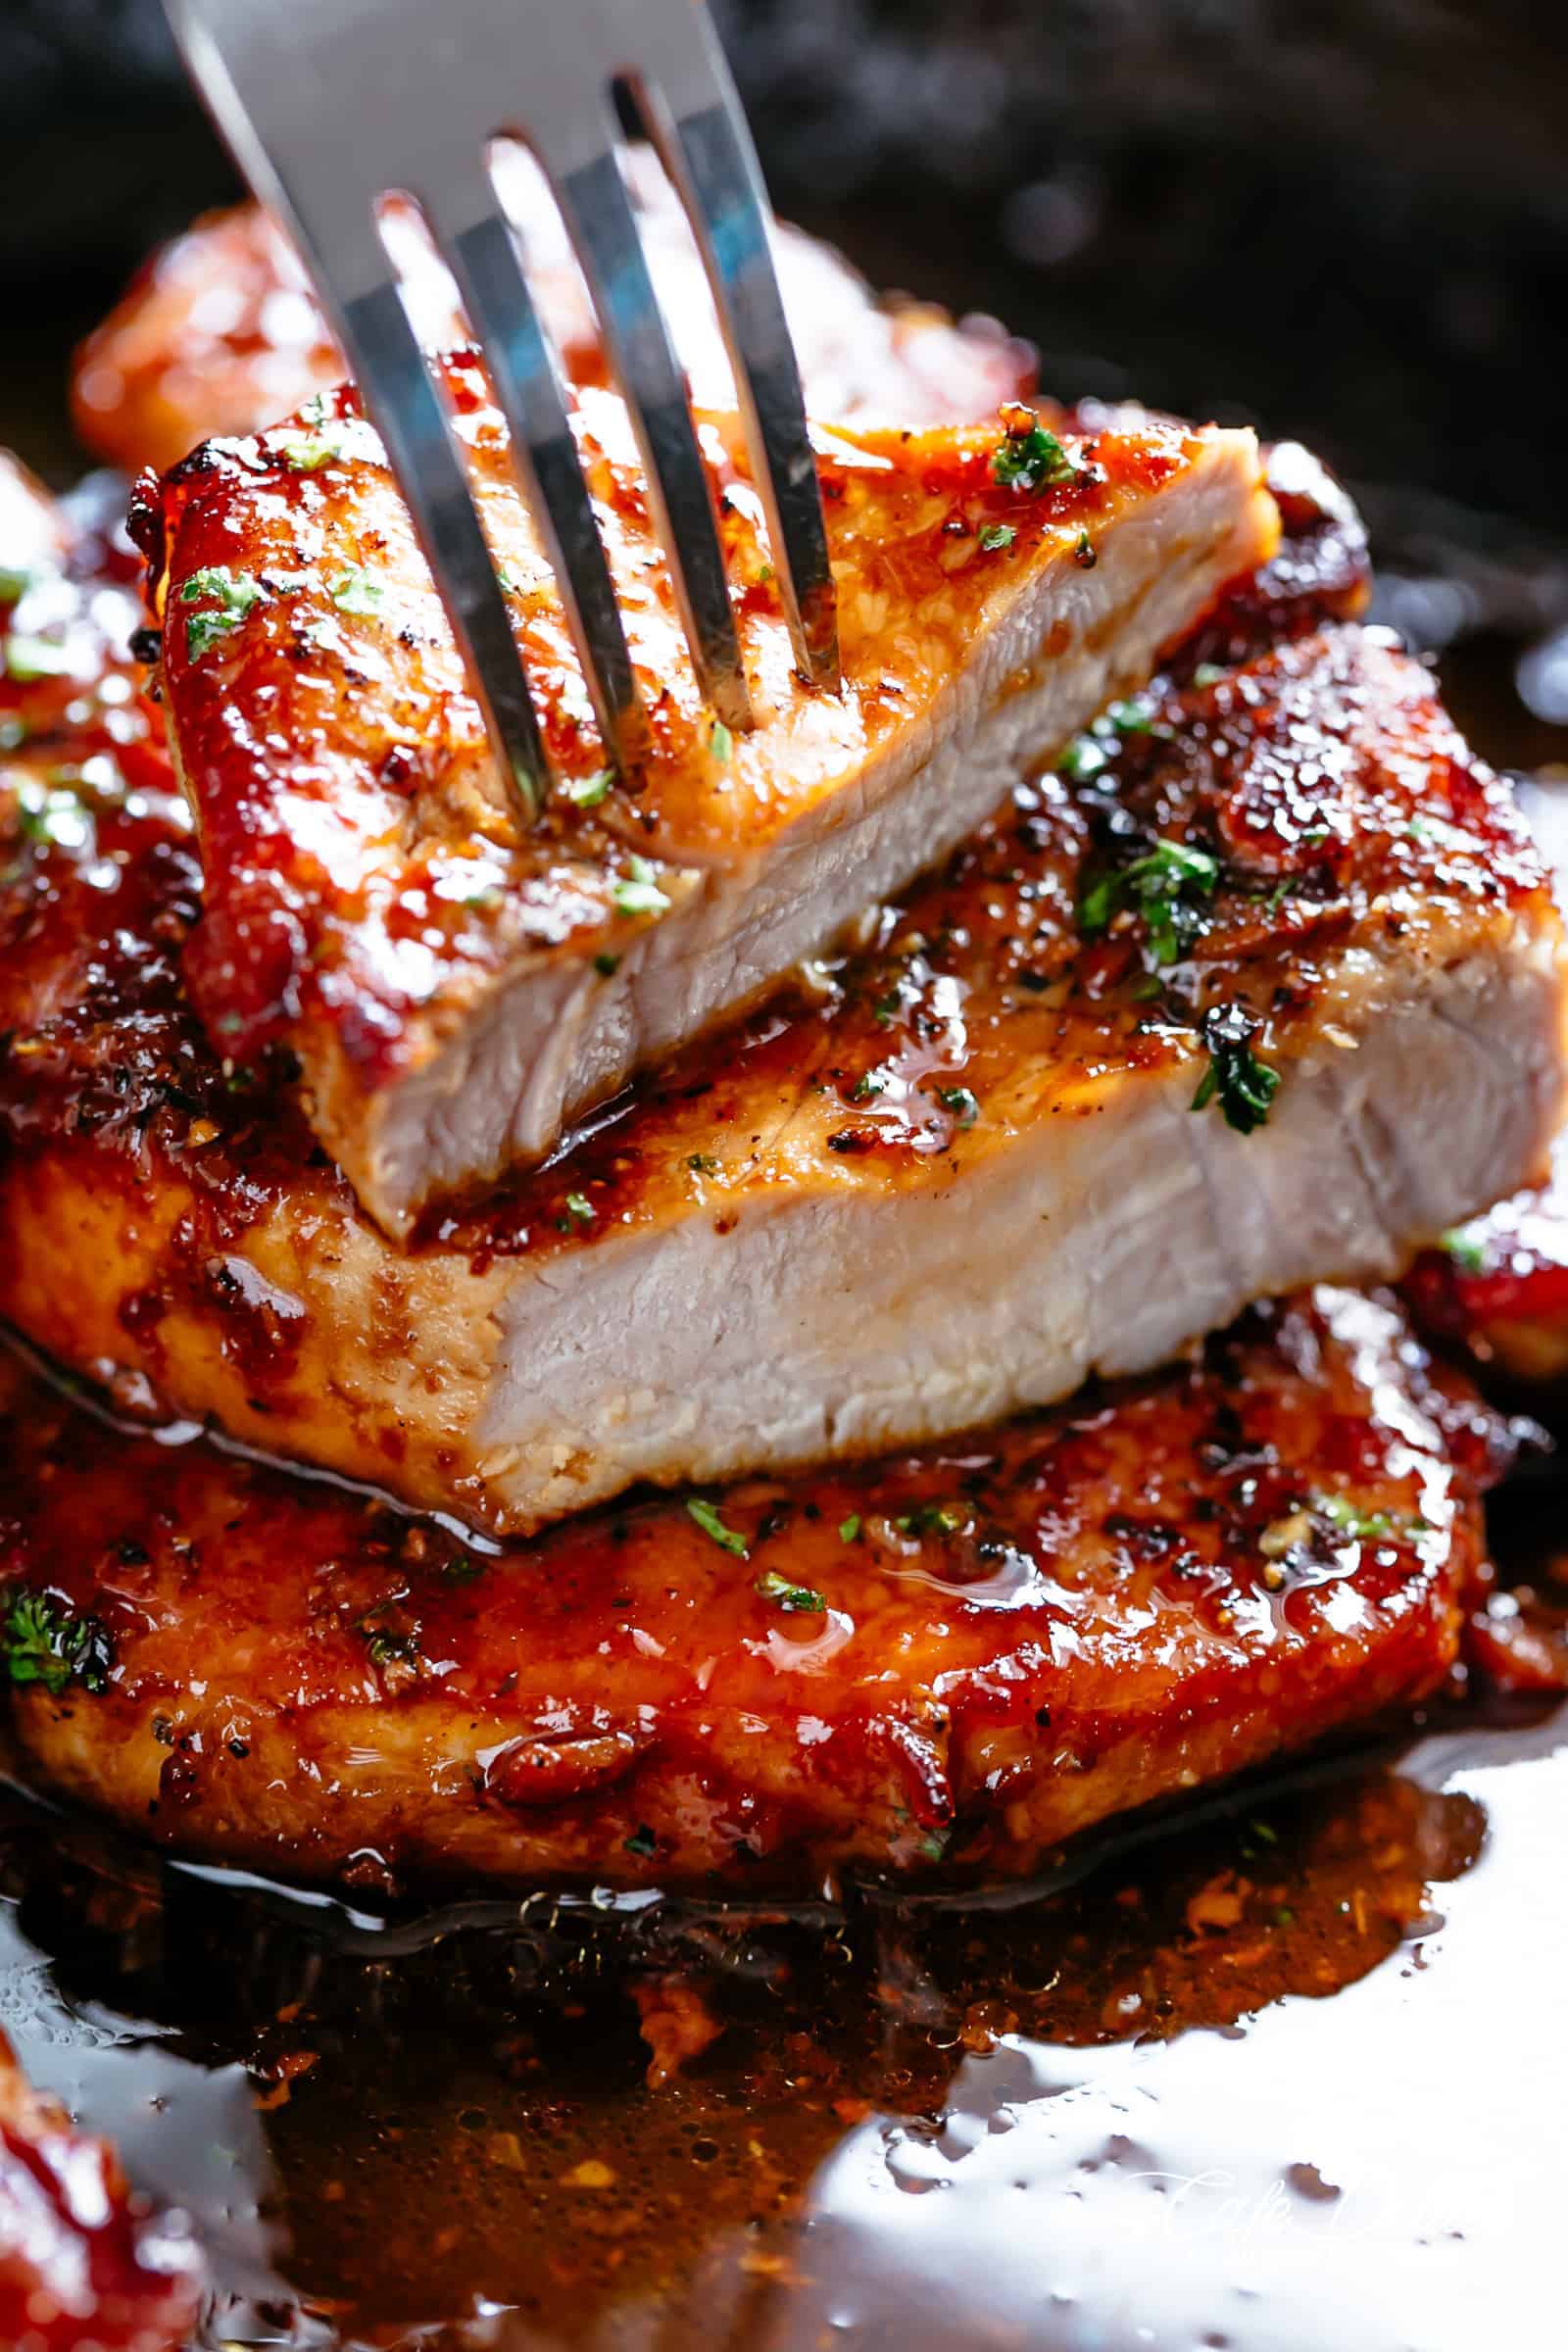 Easy Honey Garlic Pork Chops made simple, with the most amazing and addictive 4-ingredient honey garlic sauce that is so good you’ll want it on everything! | cafedelites.com